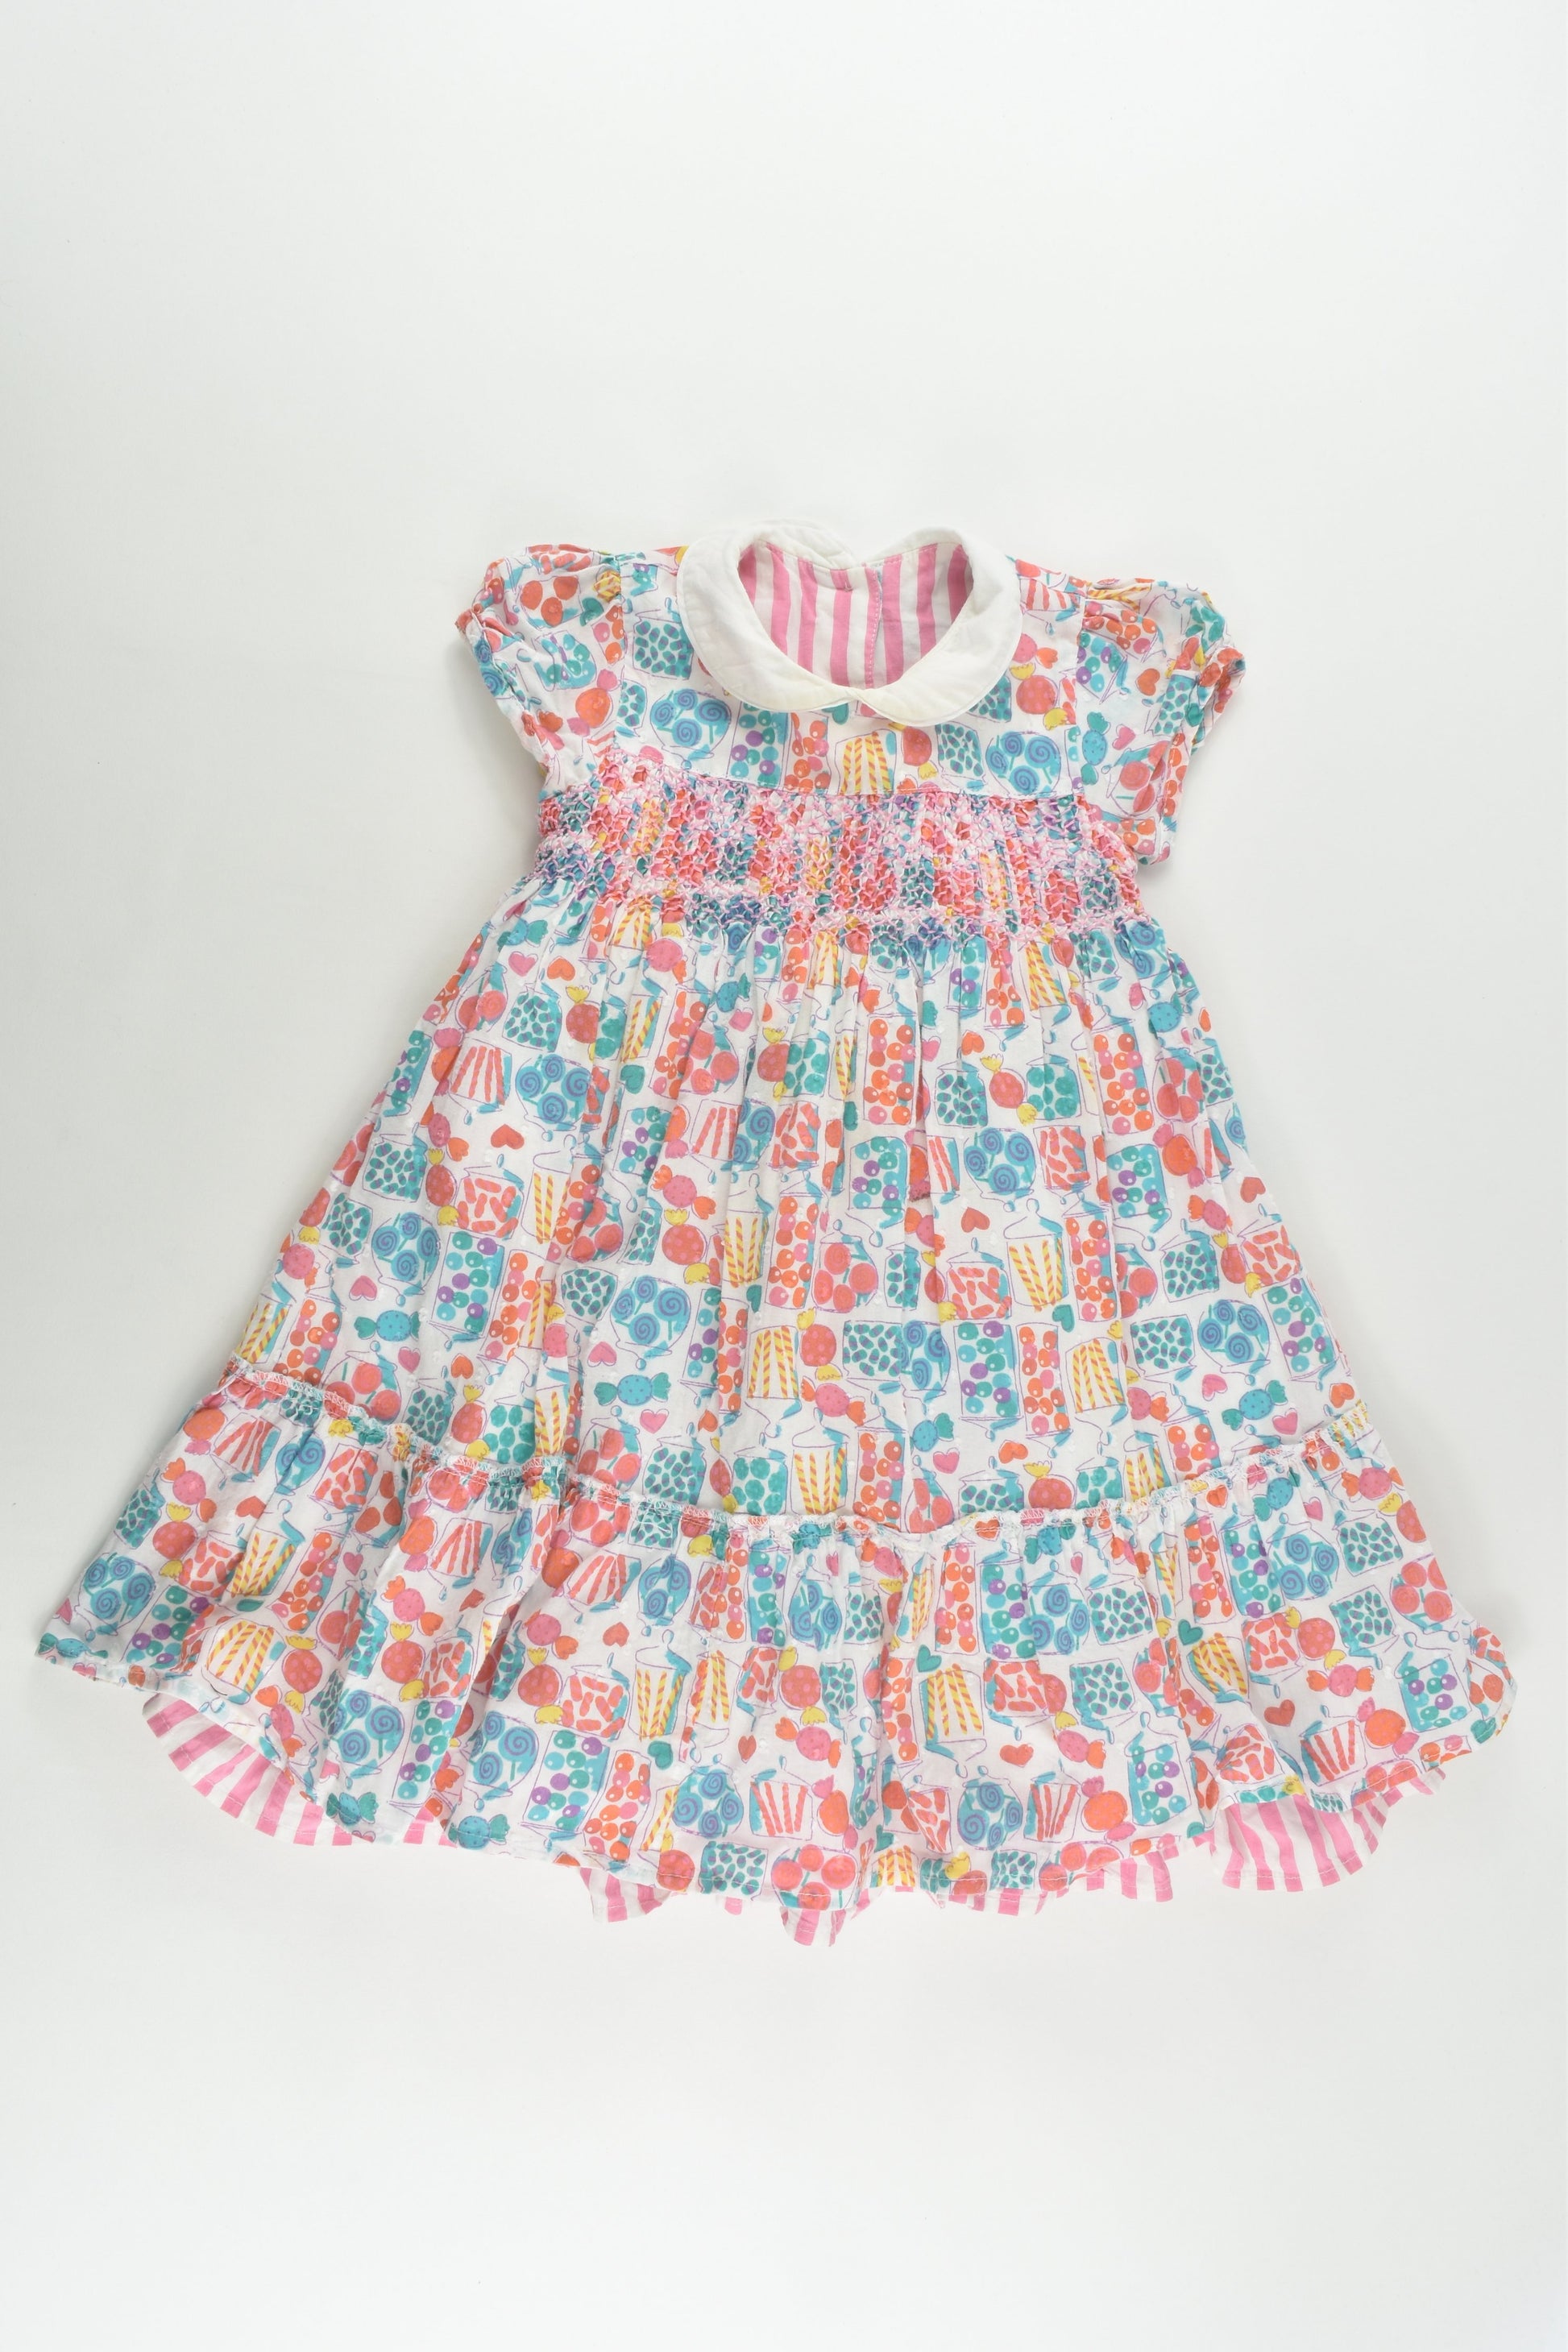 Indigo Baby by M&S Size 1 (12-18 months) Lollies Lined Smocked Dress